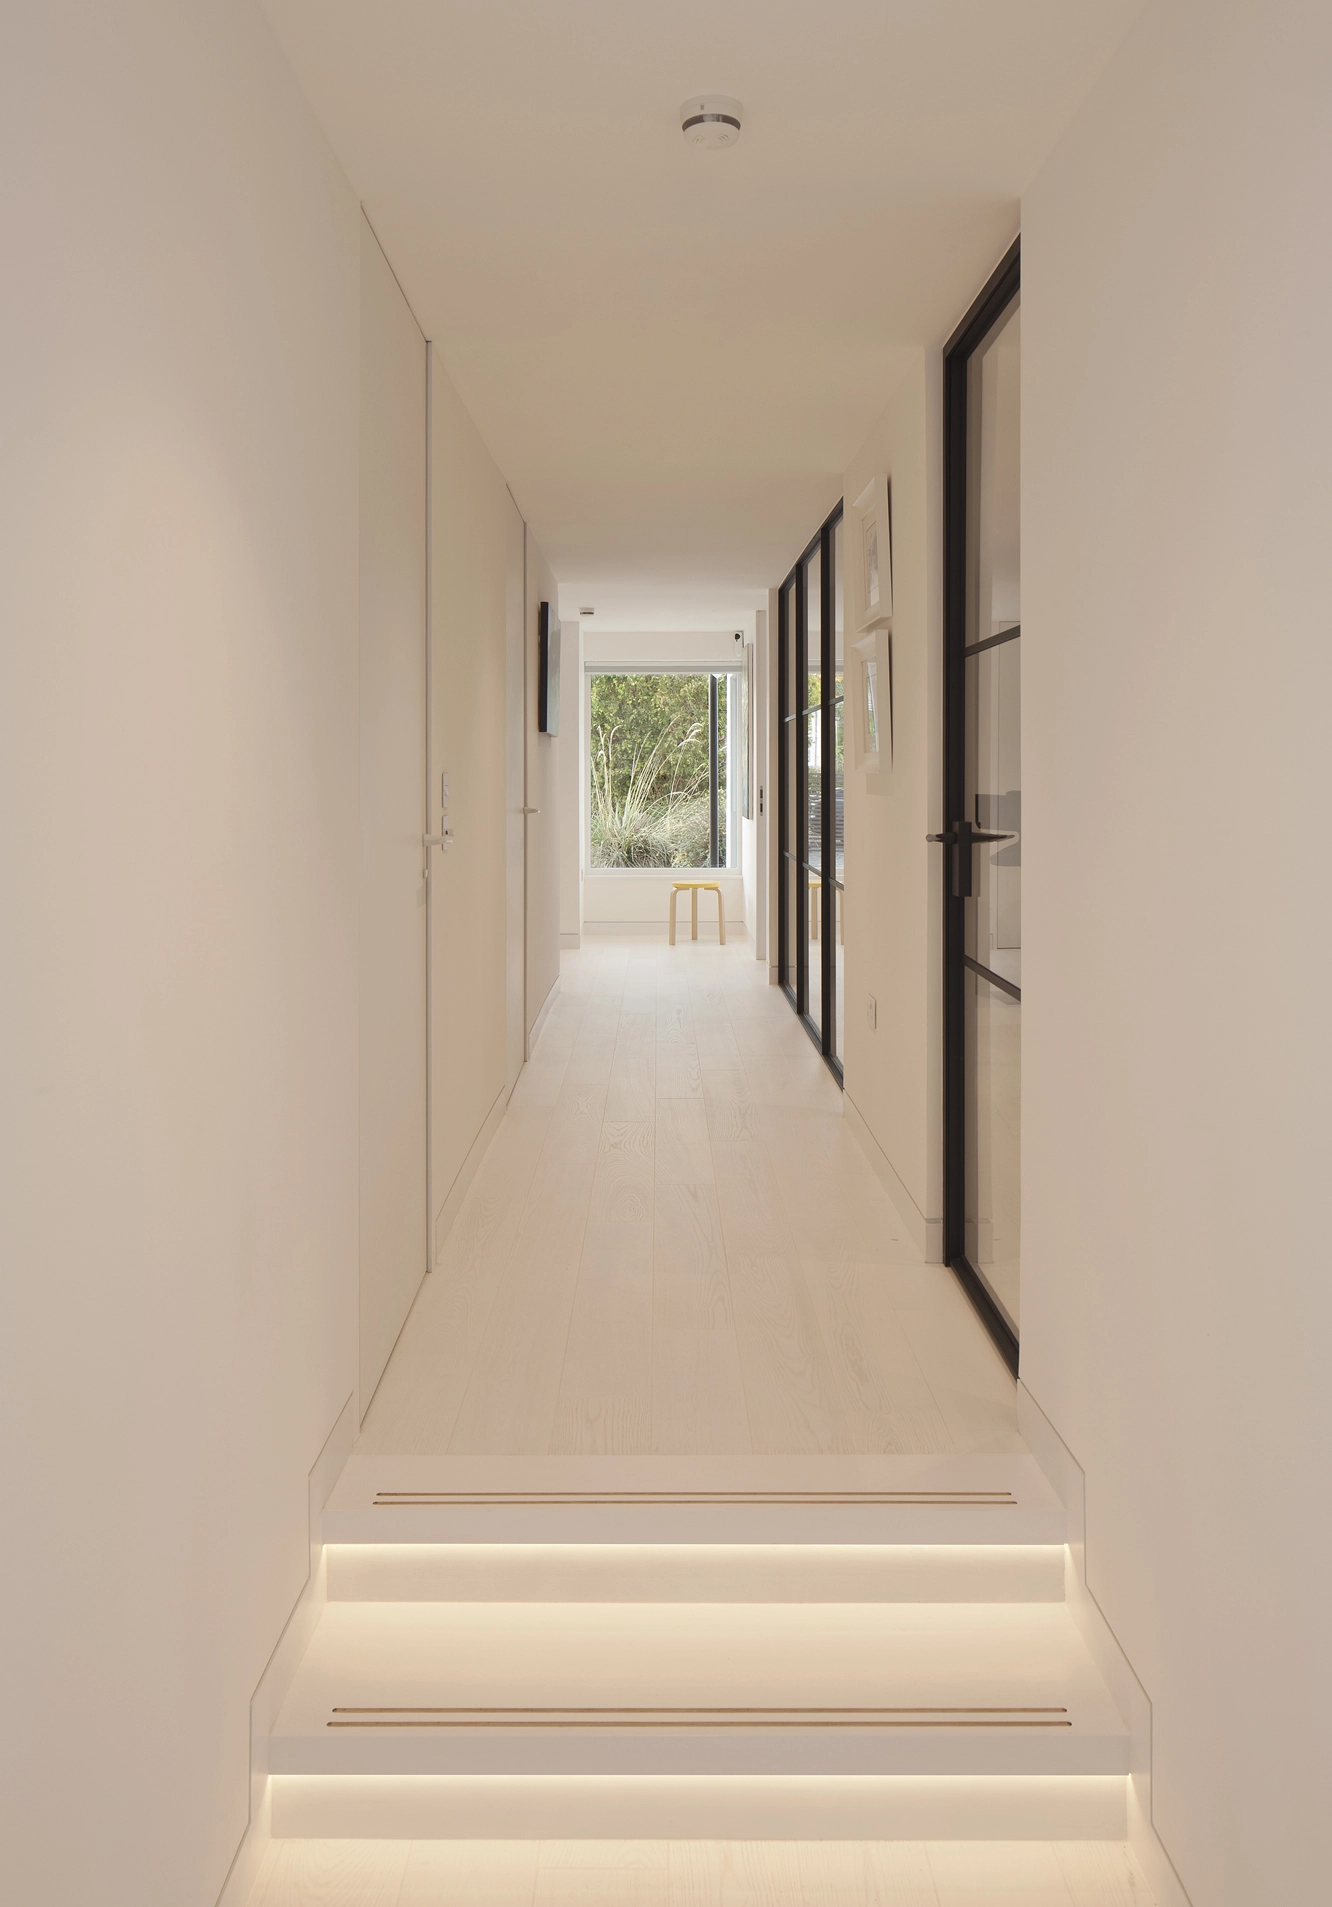 A modern home interior with bespoke design, showing the corridor within the house with white internal walls and white hardwood floors, the black aluminium frame curtain partitions provide views towards the special places throughout the design. The corridor ends with a large window framing views towards the spacious garden.